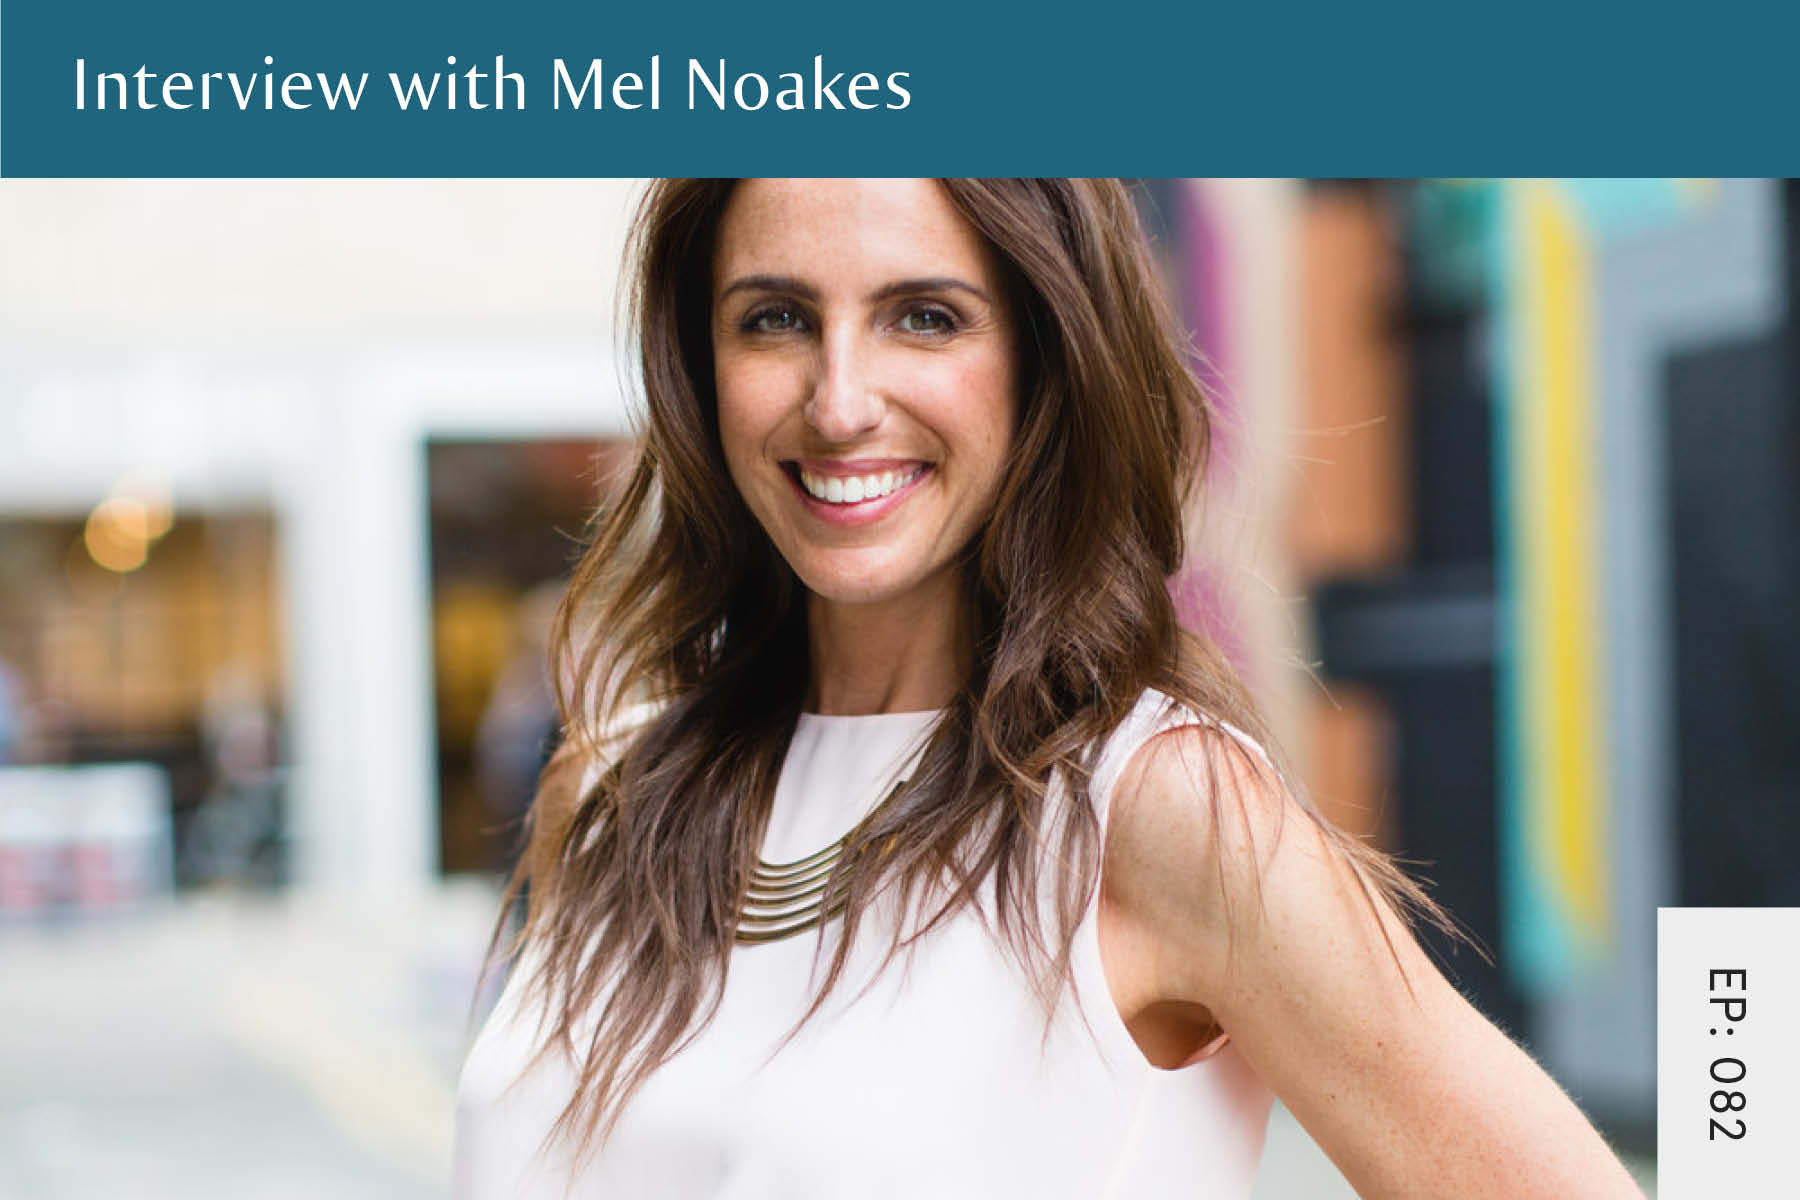 082: Interview with Mel Noakes - Seven Health: Eating Disorder Recovery and Anti Diet Nutritionist